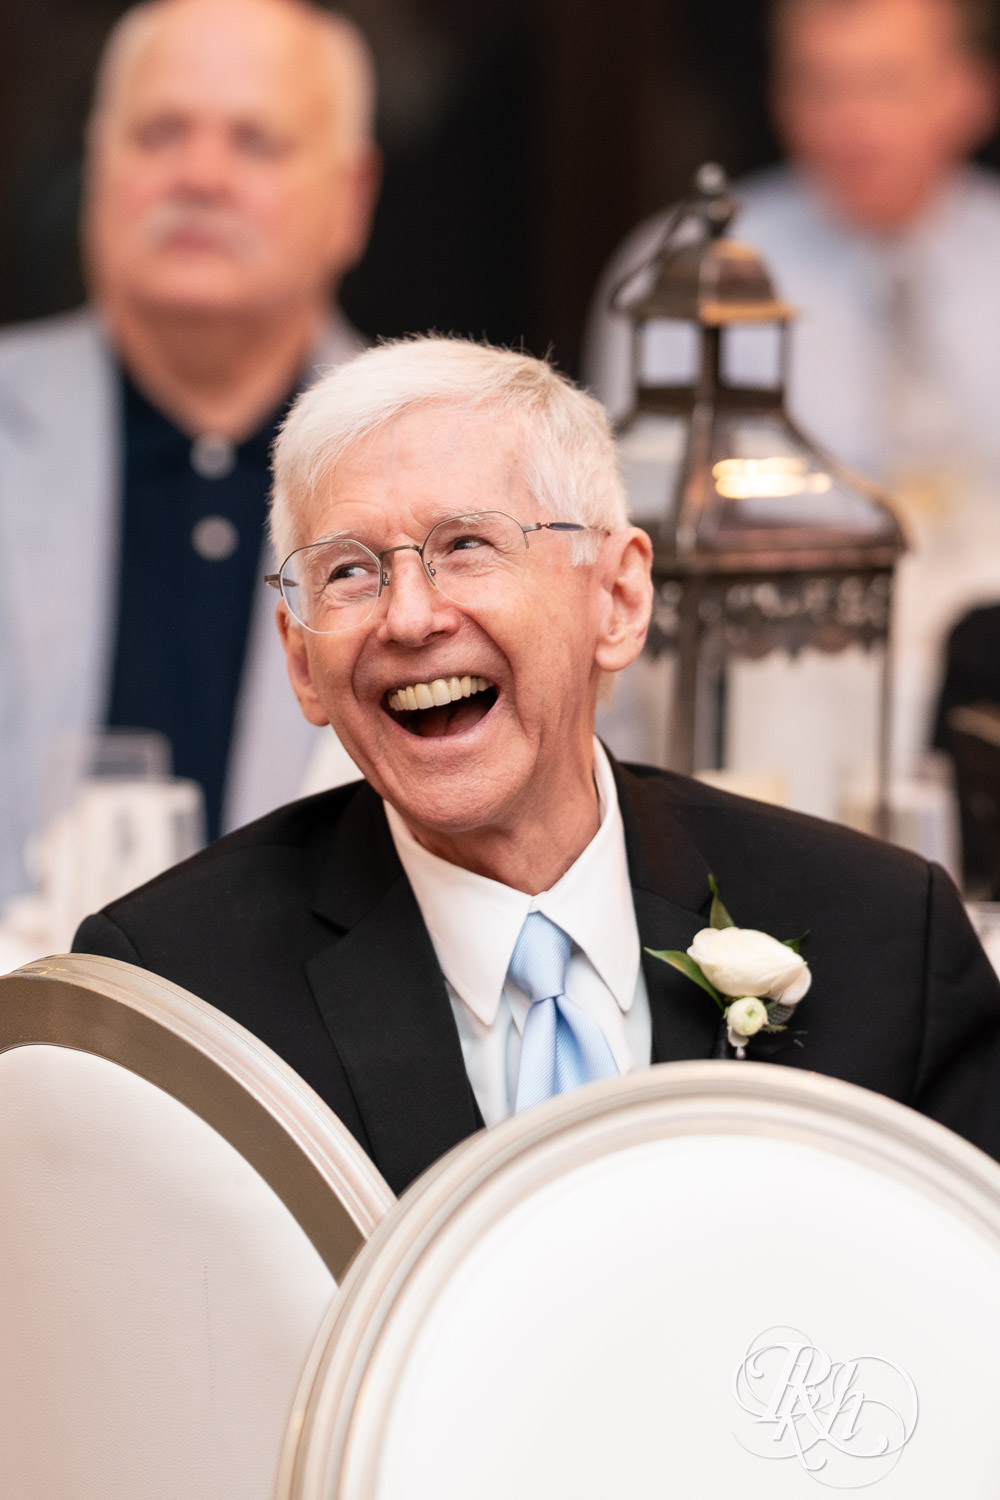 Guests smile during speeches at wedding reception at Bavaria Downs in Chaska, Minnesota.